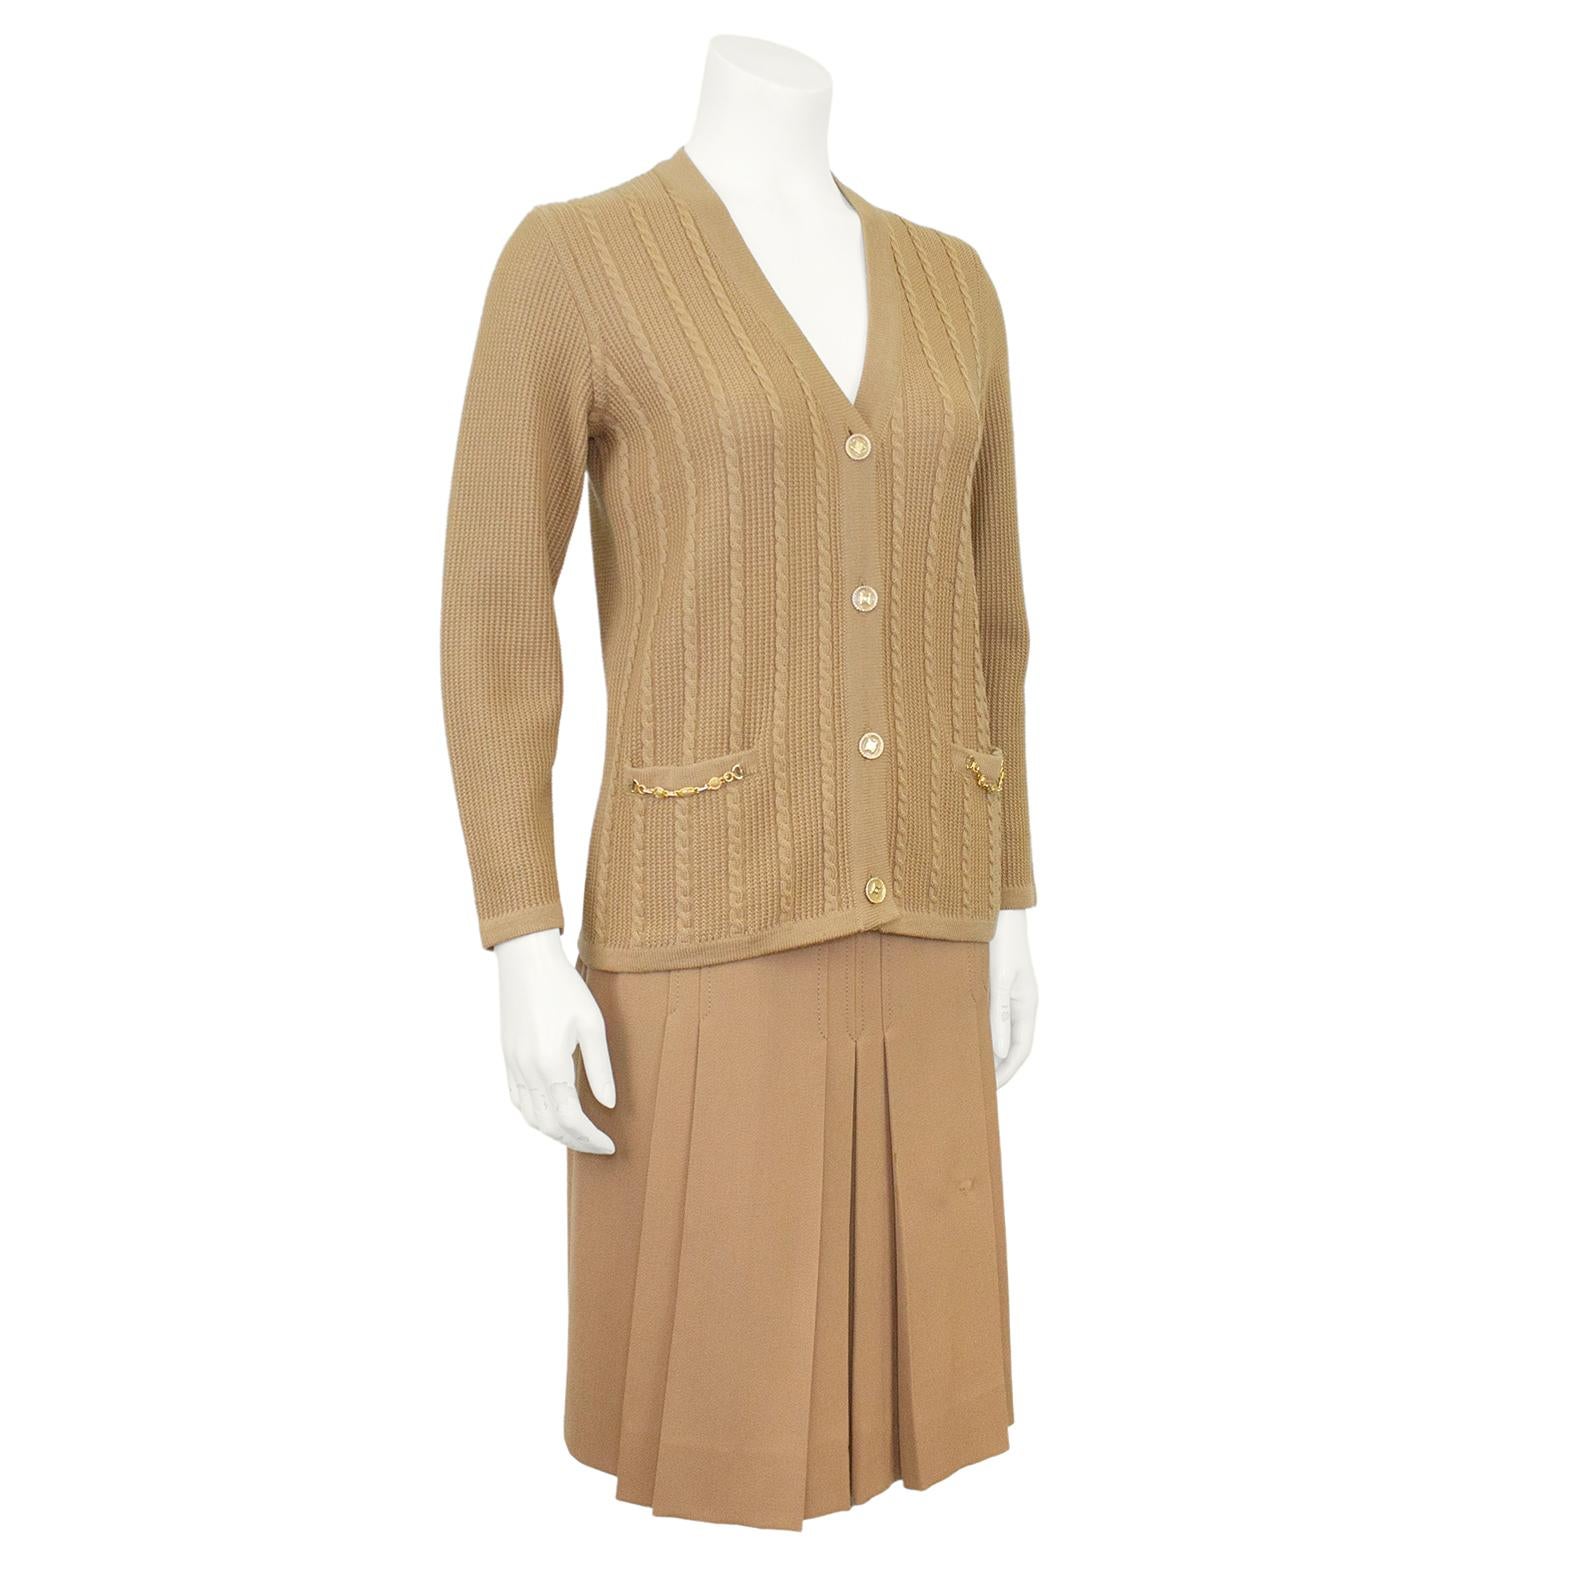 Classic and timeless Celine 100% wool beige cardigan and matching gabardine skirt ensemble from the 1970's. The set features a cable knit and waffle cardigan with gold tone metal and cream enamel chain accents at the pockets. Beautiful gold tone and